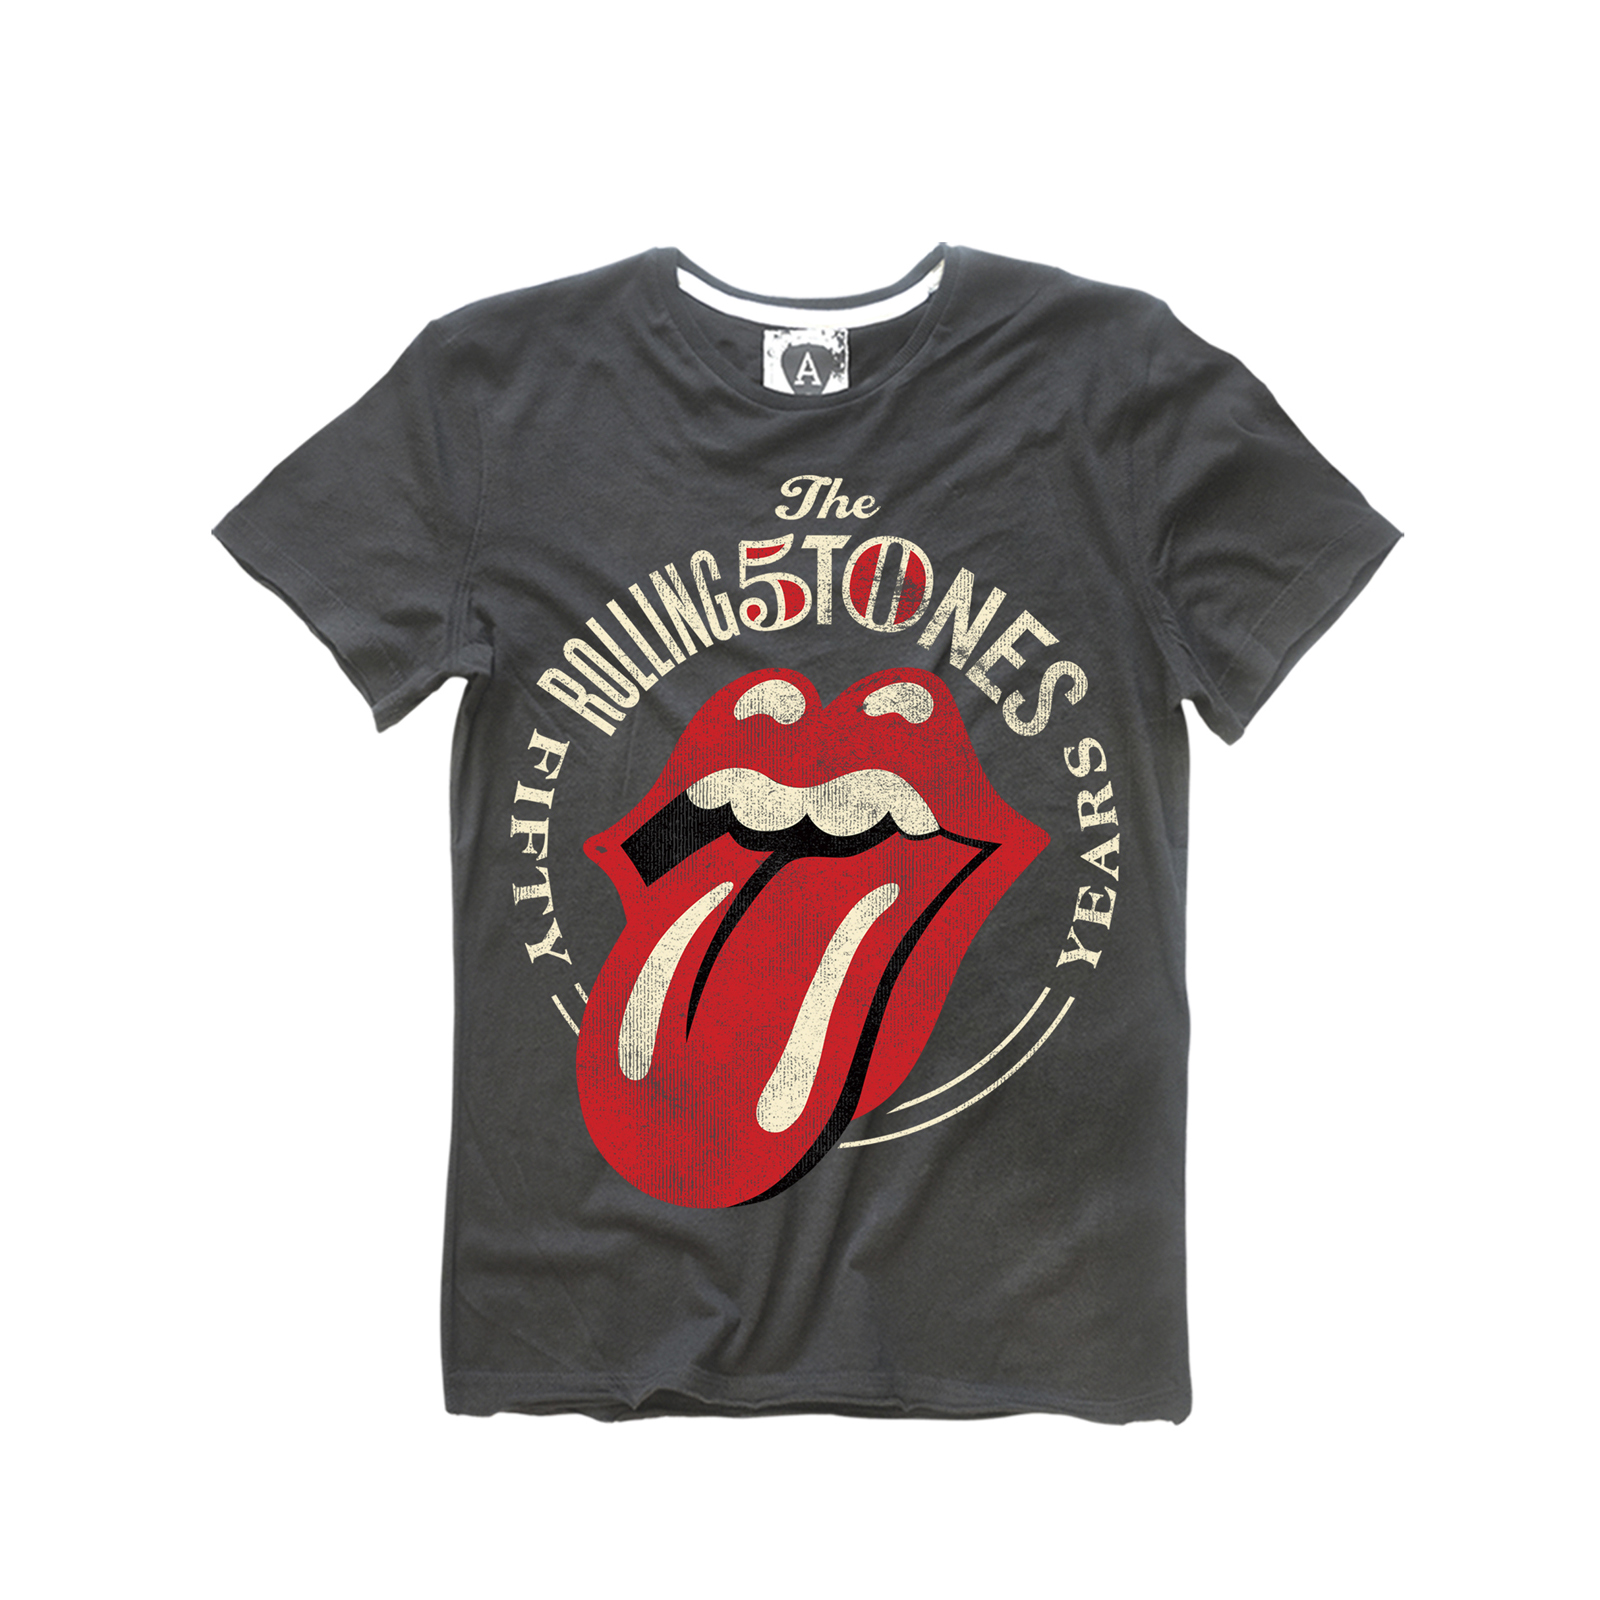 Jam Session | The Rolling Stones Tee Shirt